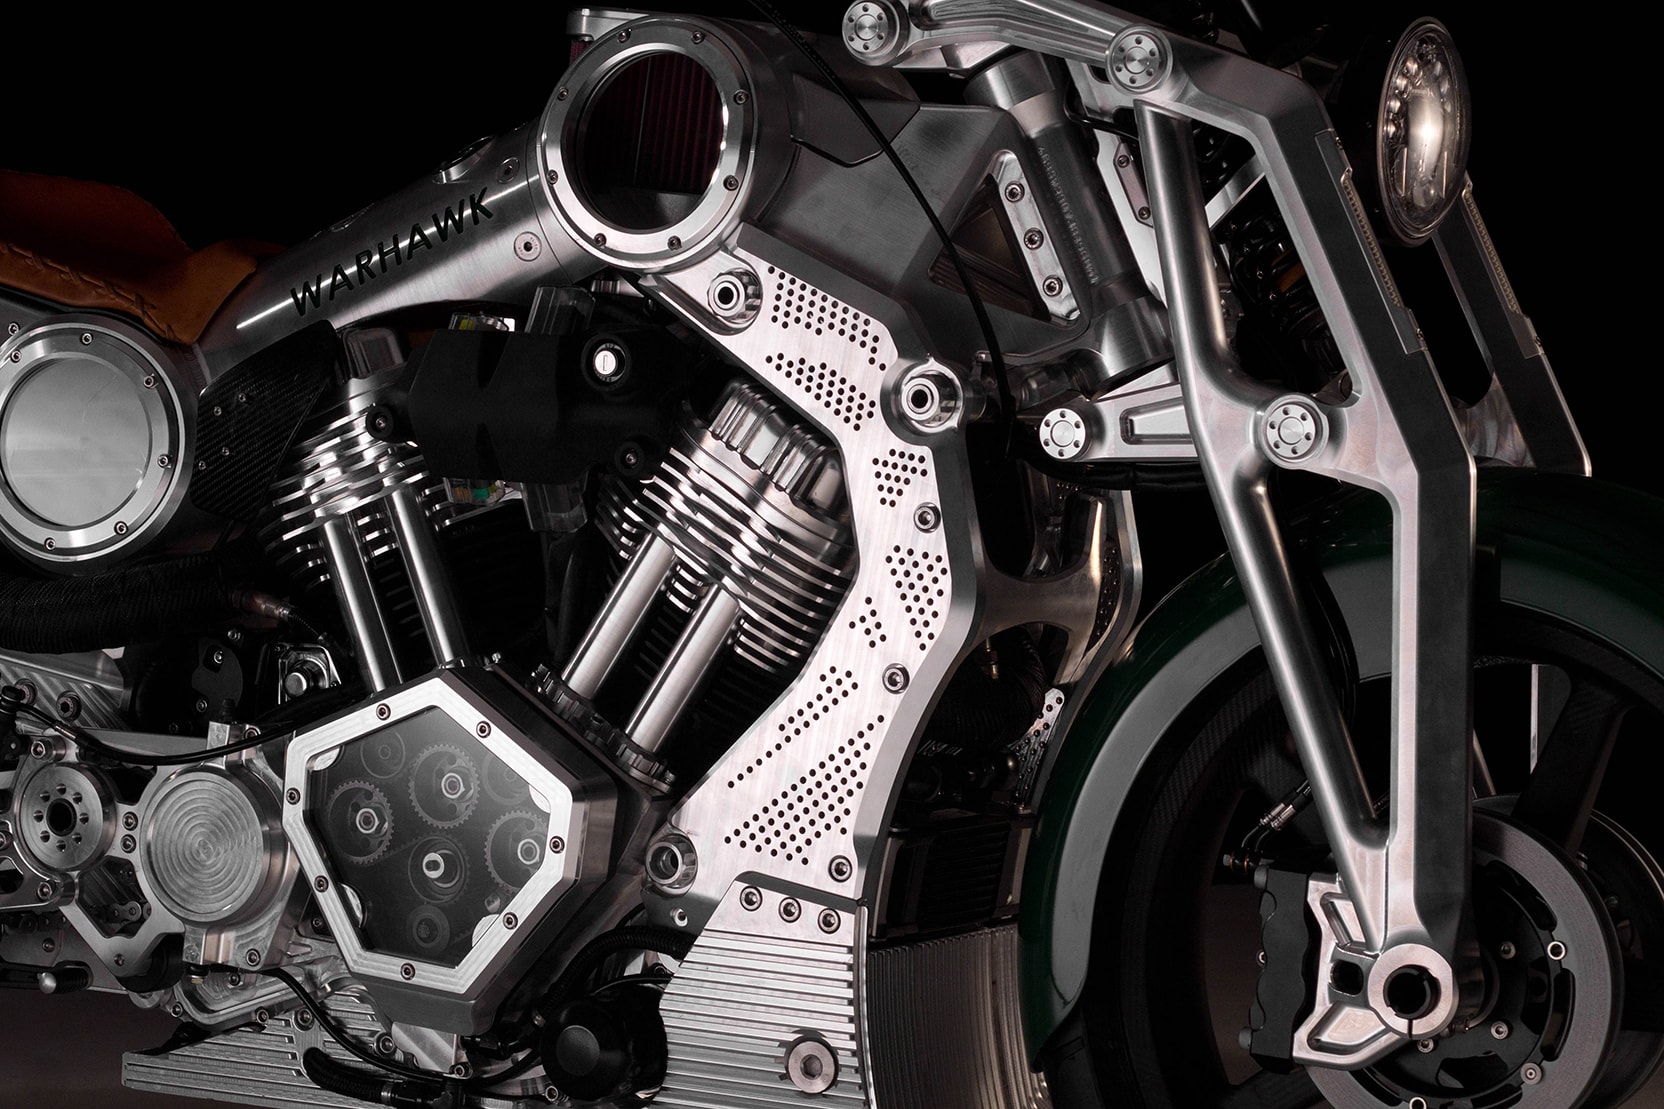 Curtiss Released First Bike 100 Years Warhawk Motorcycle Aluminum Frame 2200cc V-Twin 165 MPH Girder Forks